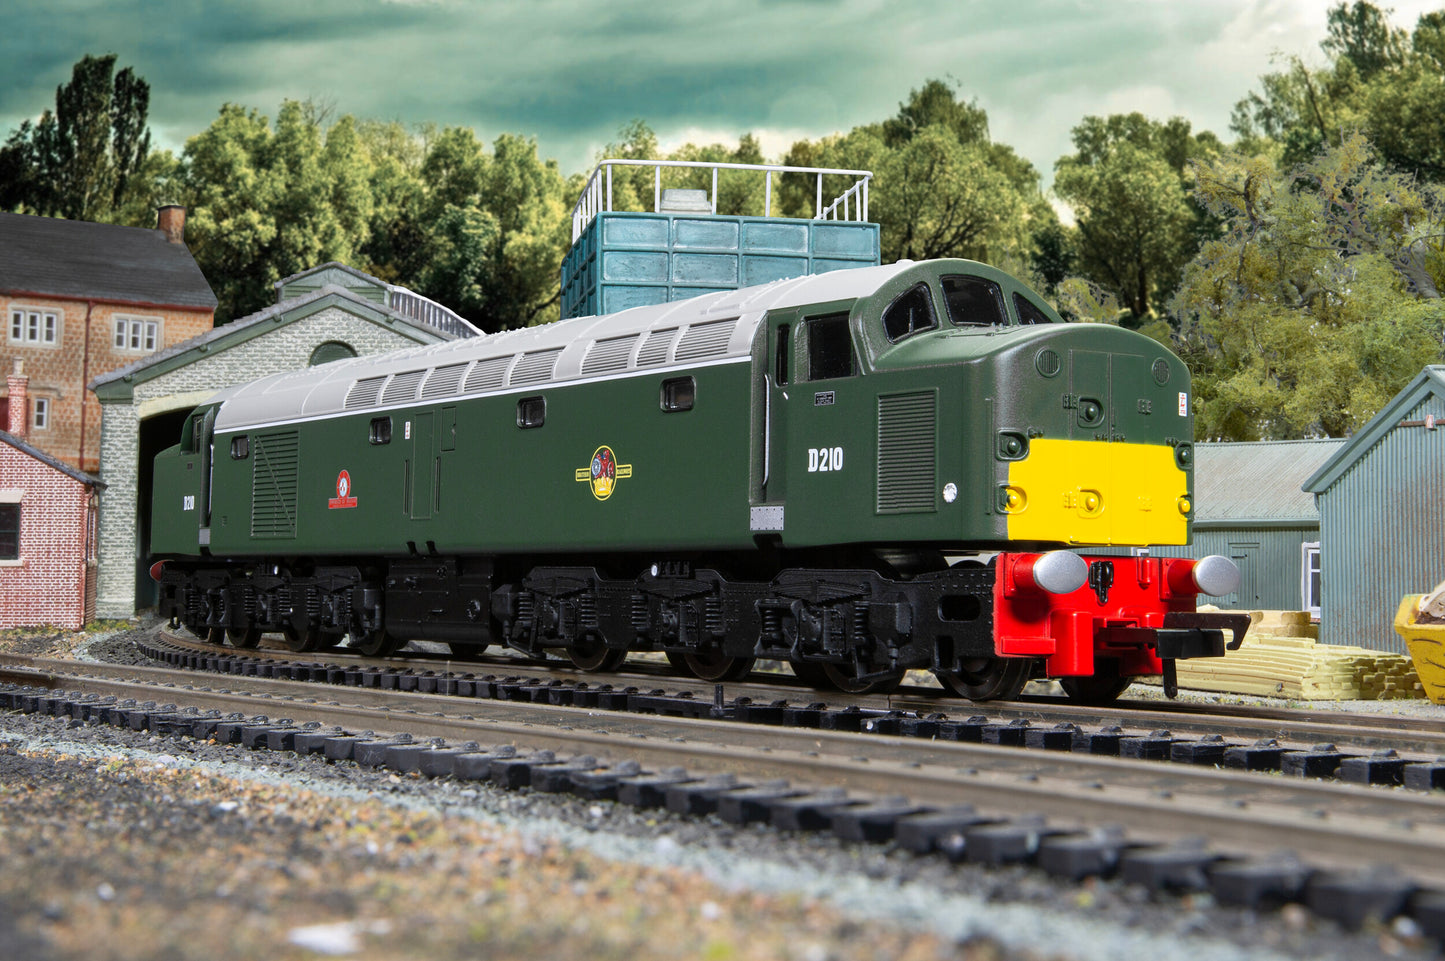 Hornby R30192 - Railroad Plus (enhanced Livery) British Railways Class 40 Empress of Britain No. D210 (includes etched nameplates)